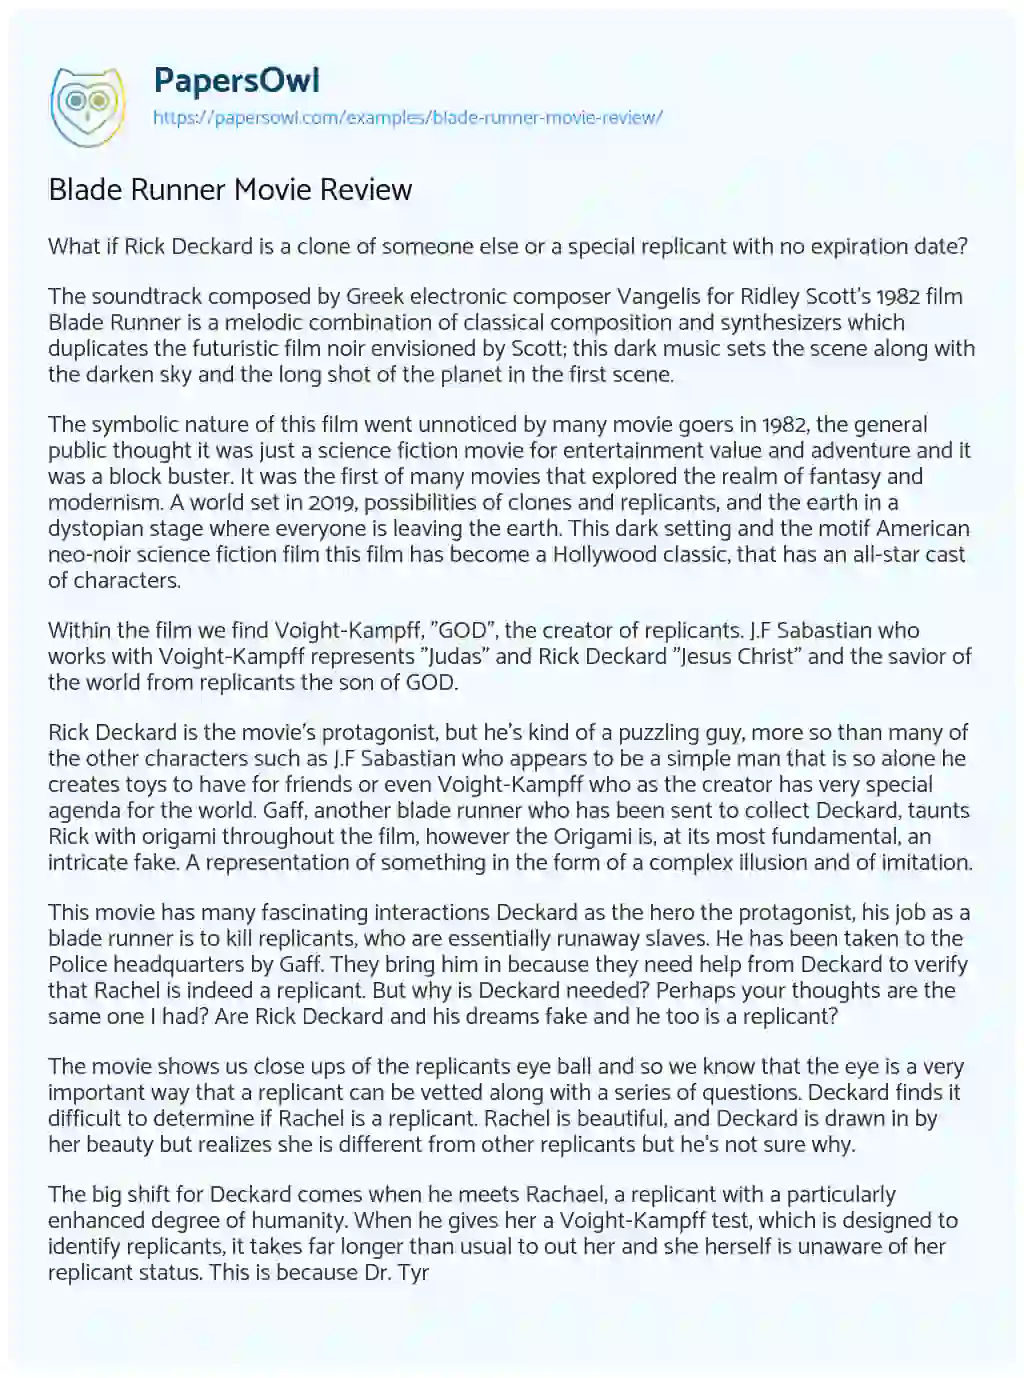 Essay on Blade Runner Movie Review